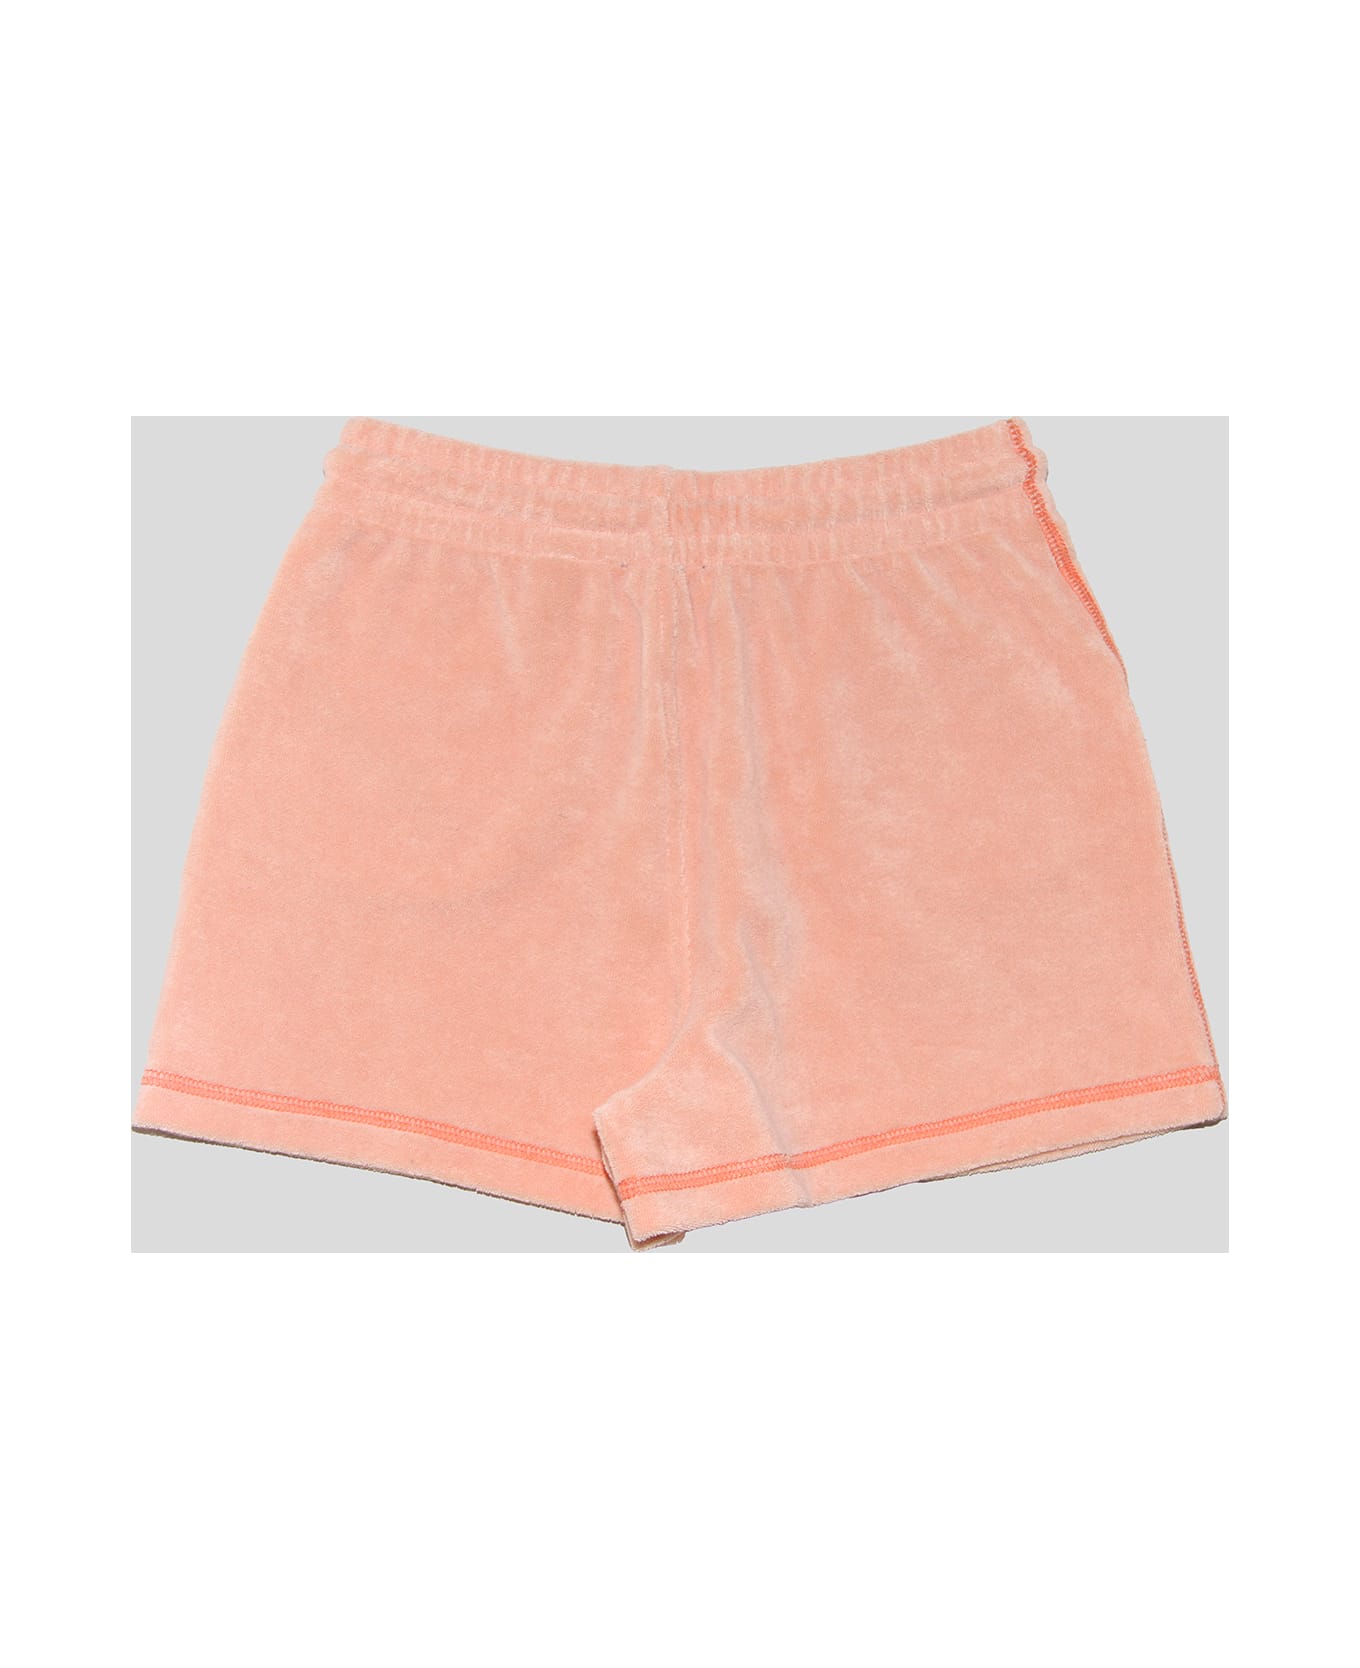 Burberry Dusky Coral Cotton Blend Shorts - DUSKY CORAL ボトムス